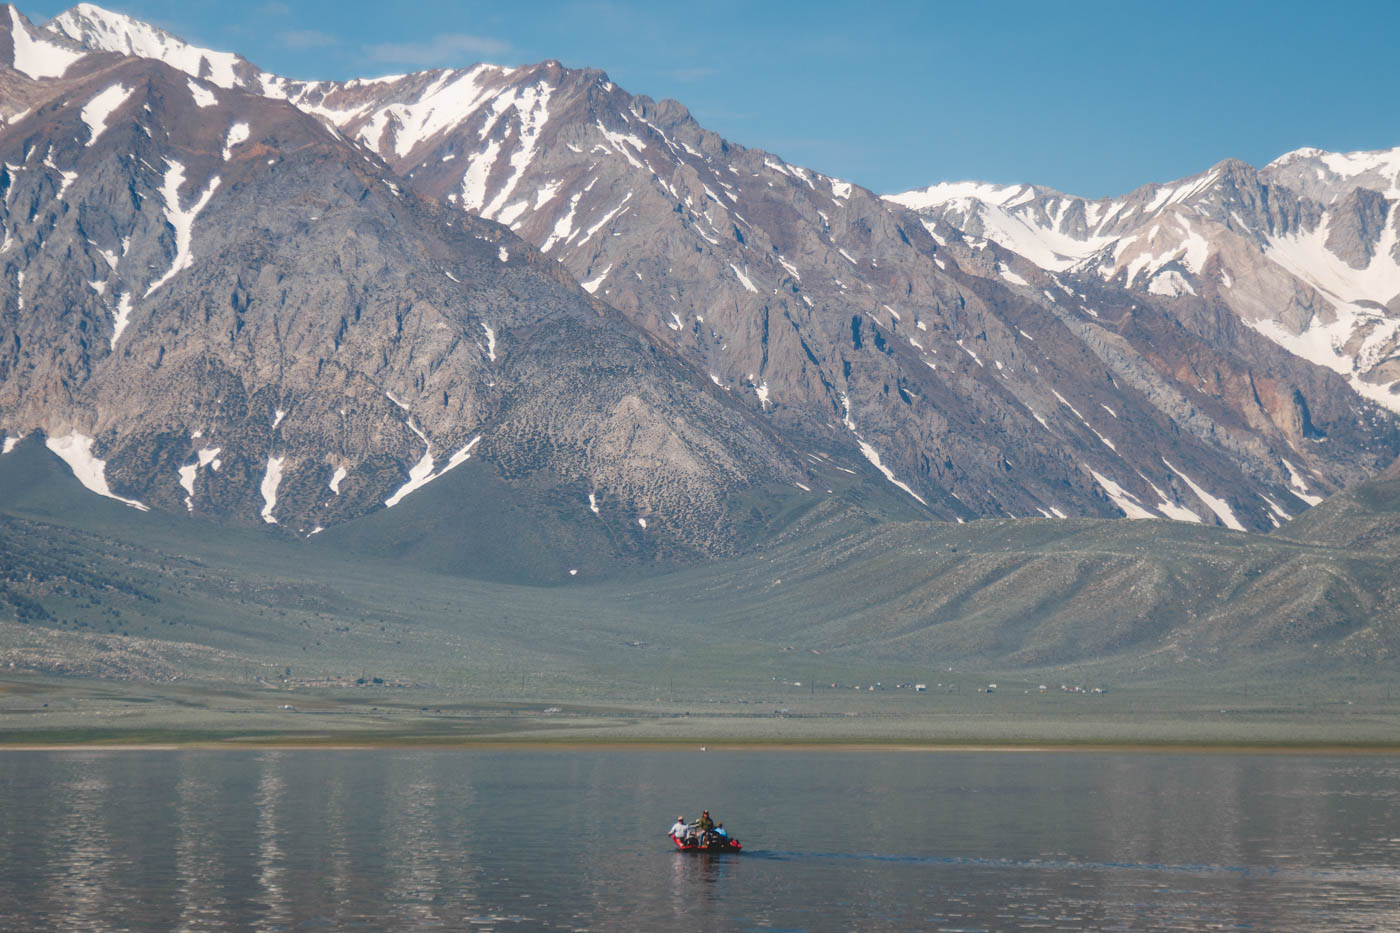 Three people in a red dingy on Crowley Lake with an amazing view of snow-capped mountains.